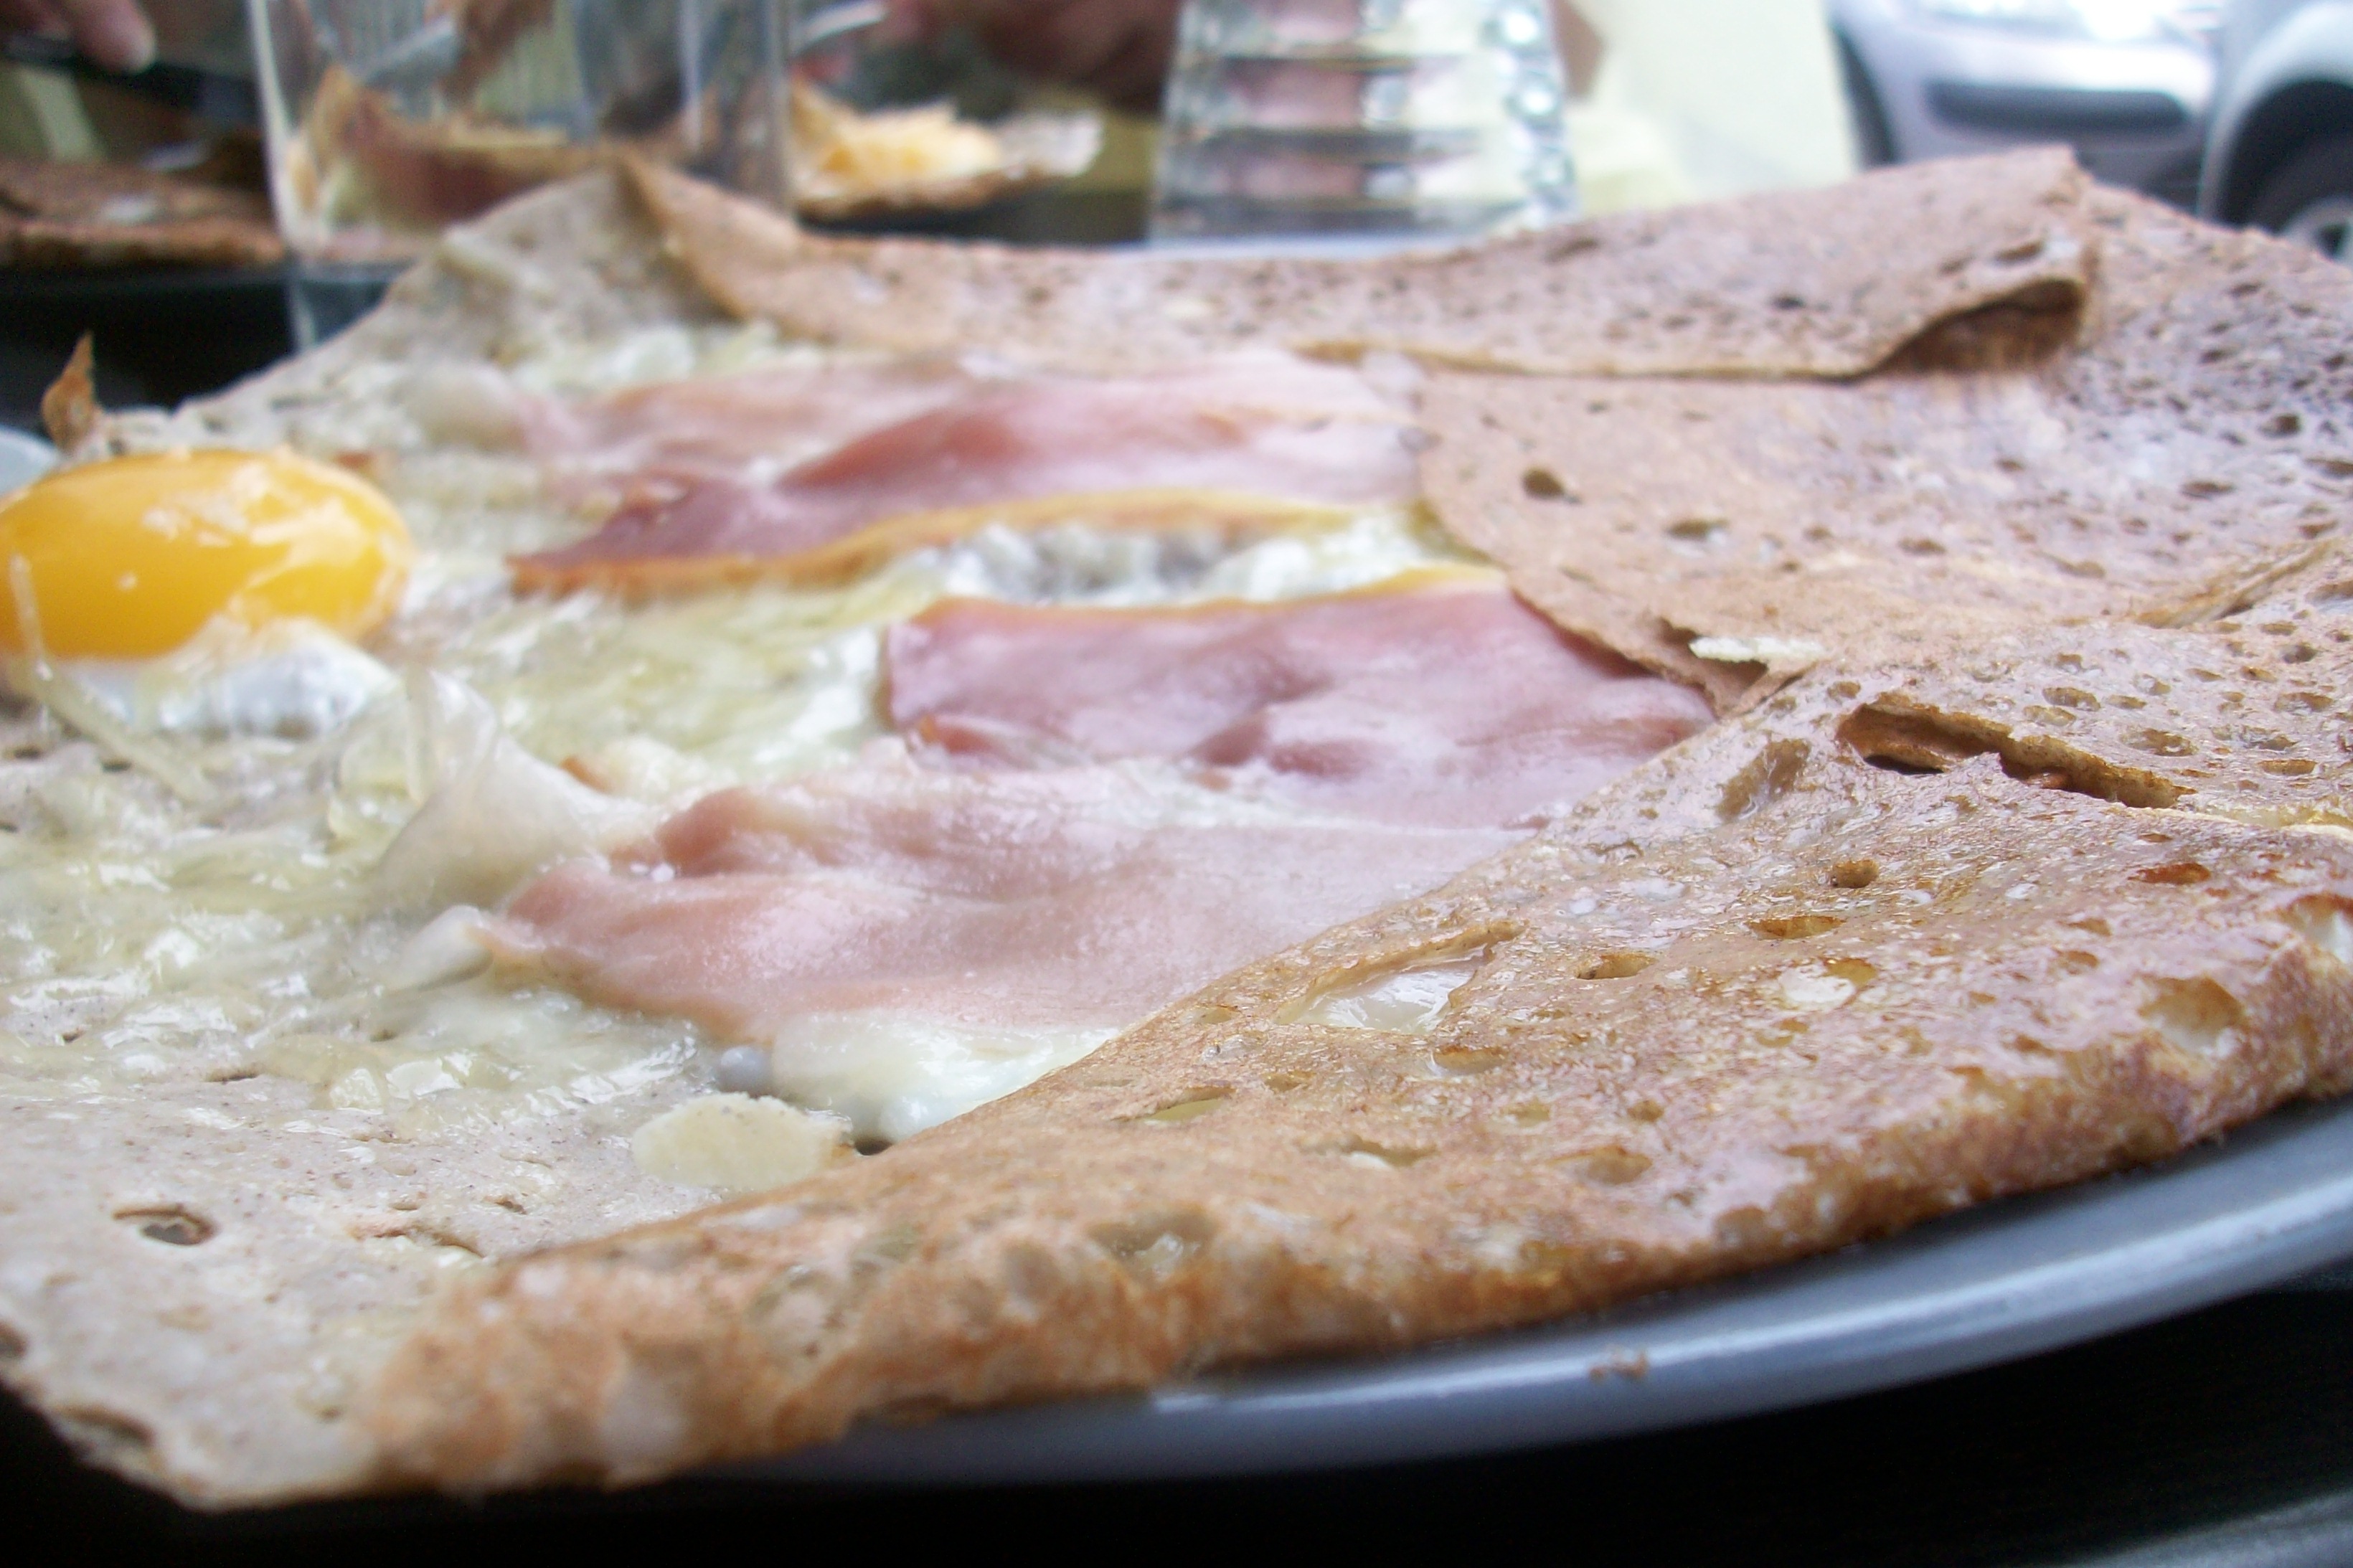 Galette Bretonne: Dauphinoise and Saucisse